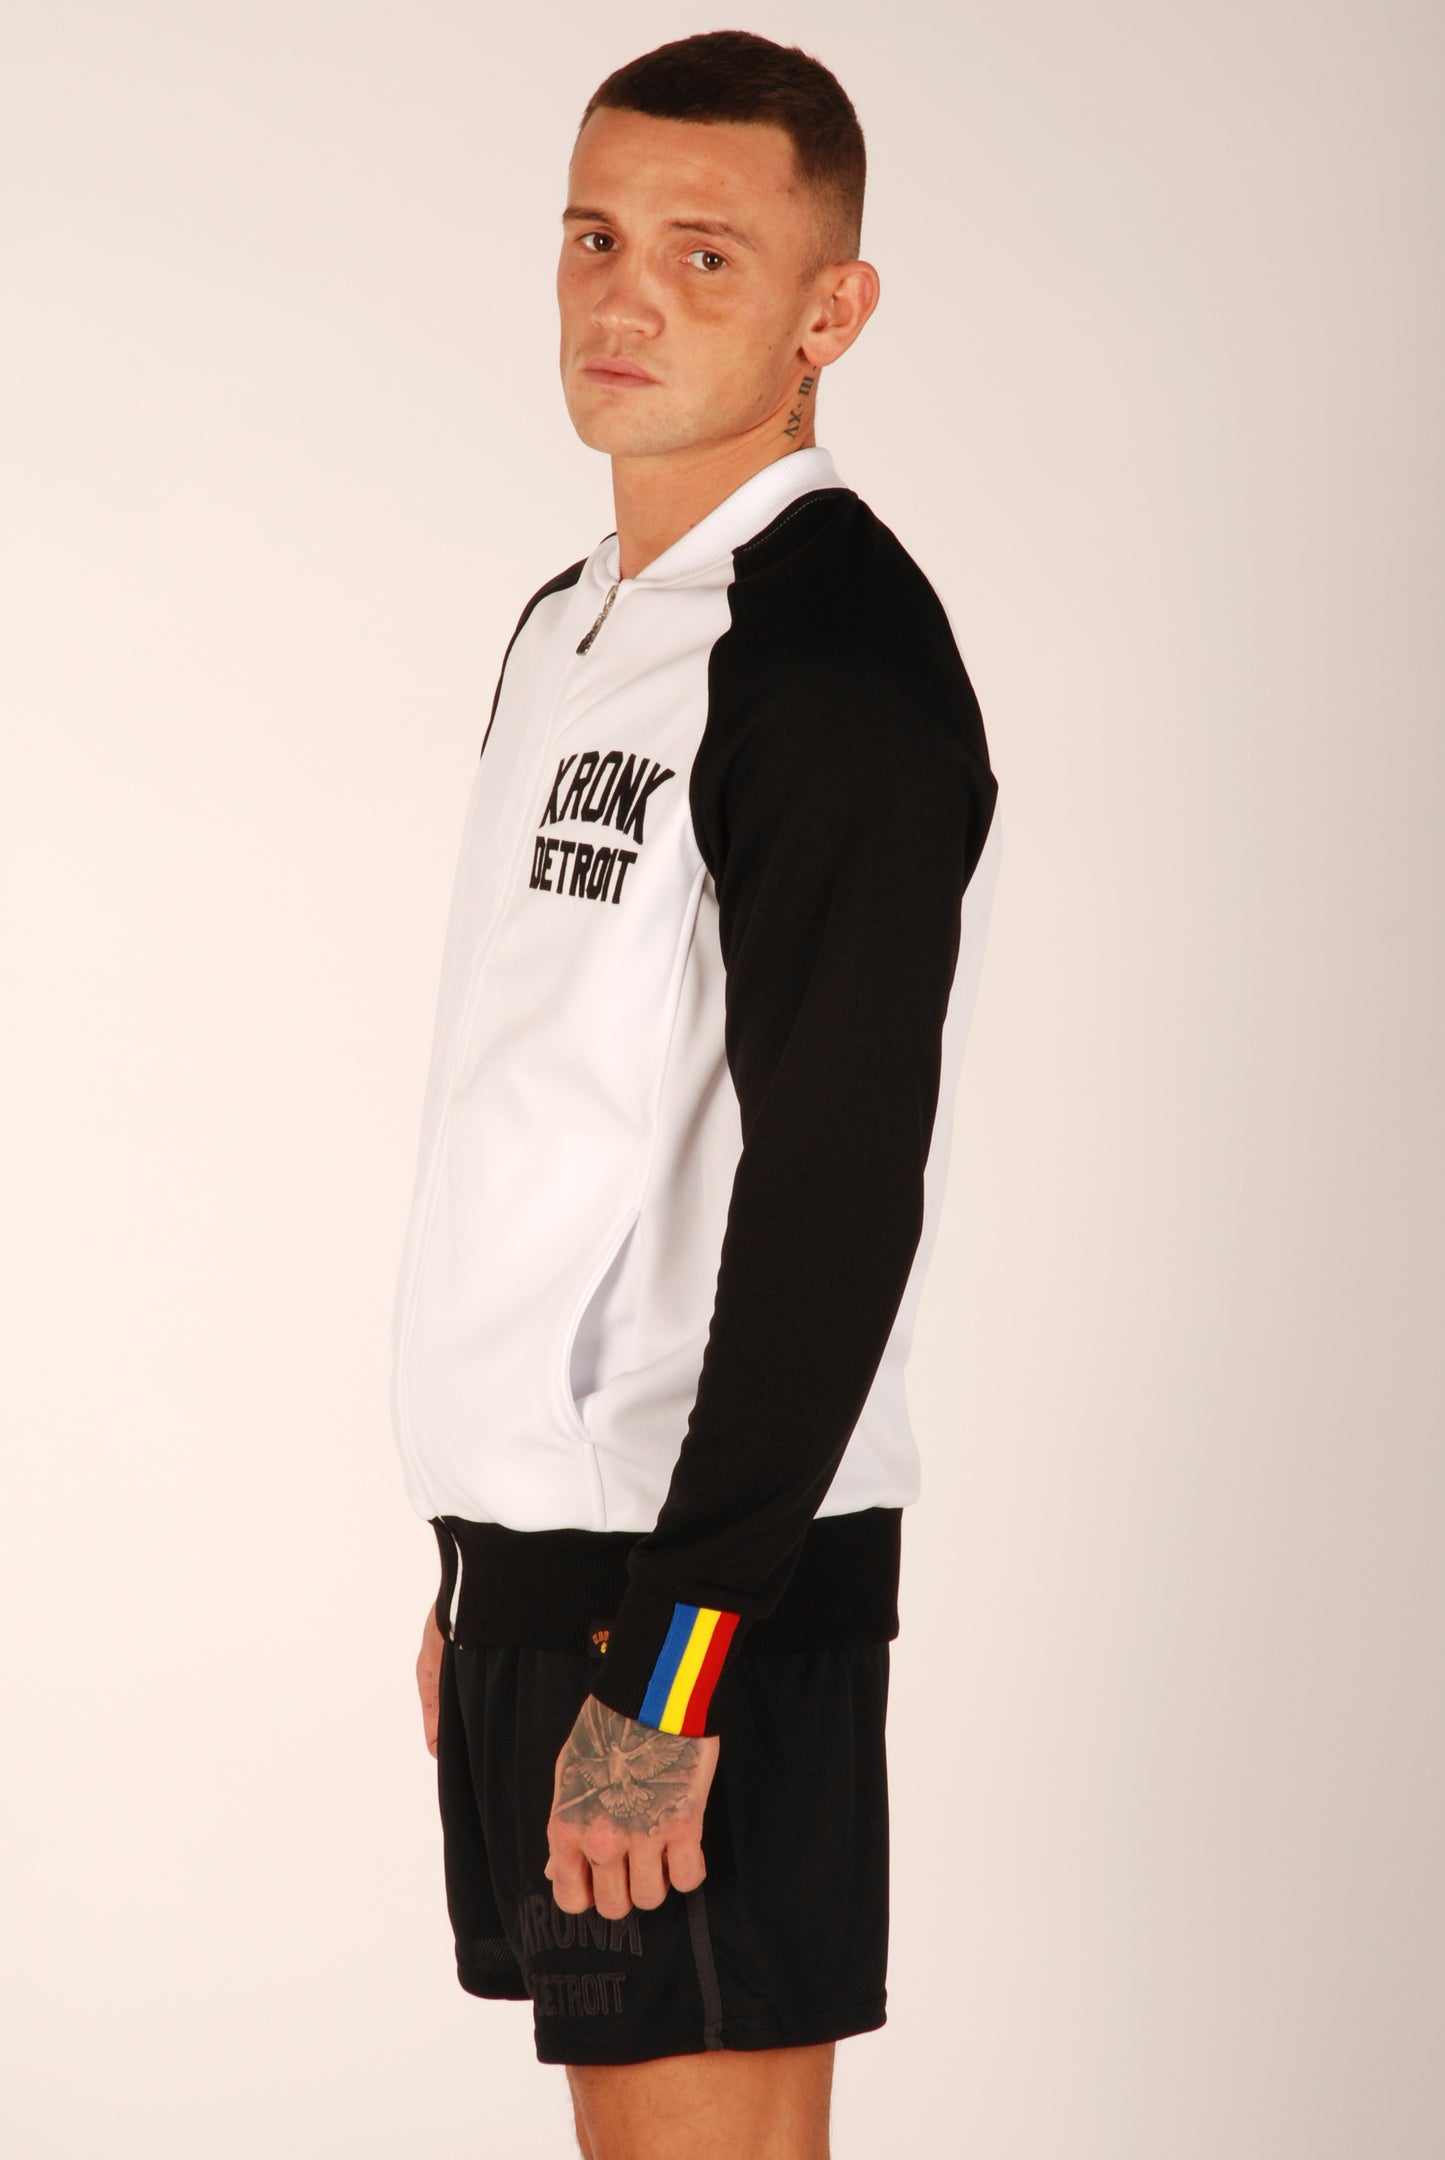 KRONK Iconic Detroit Zip Track Top Black and White